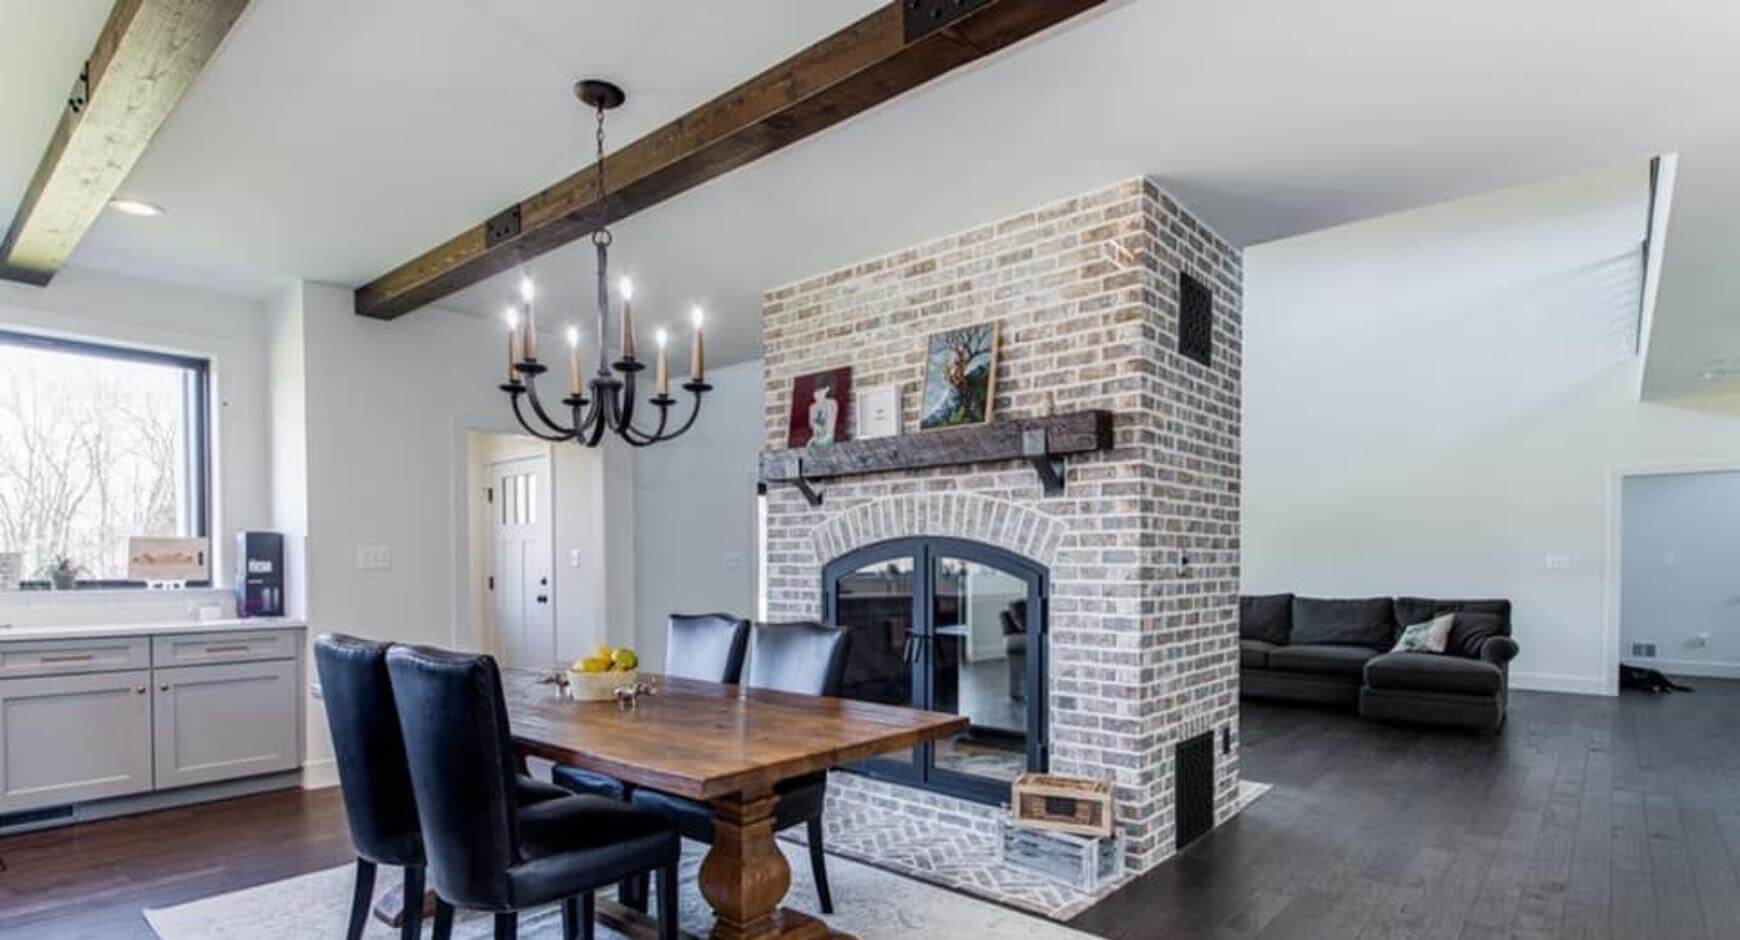 double sided brick fireplace